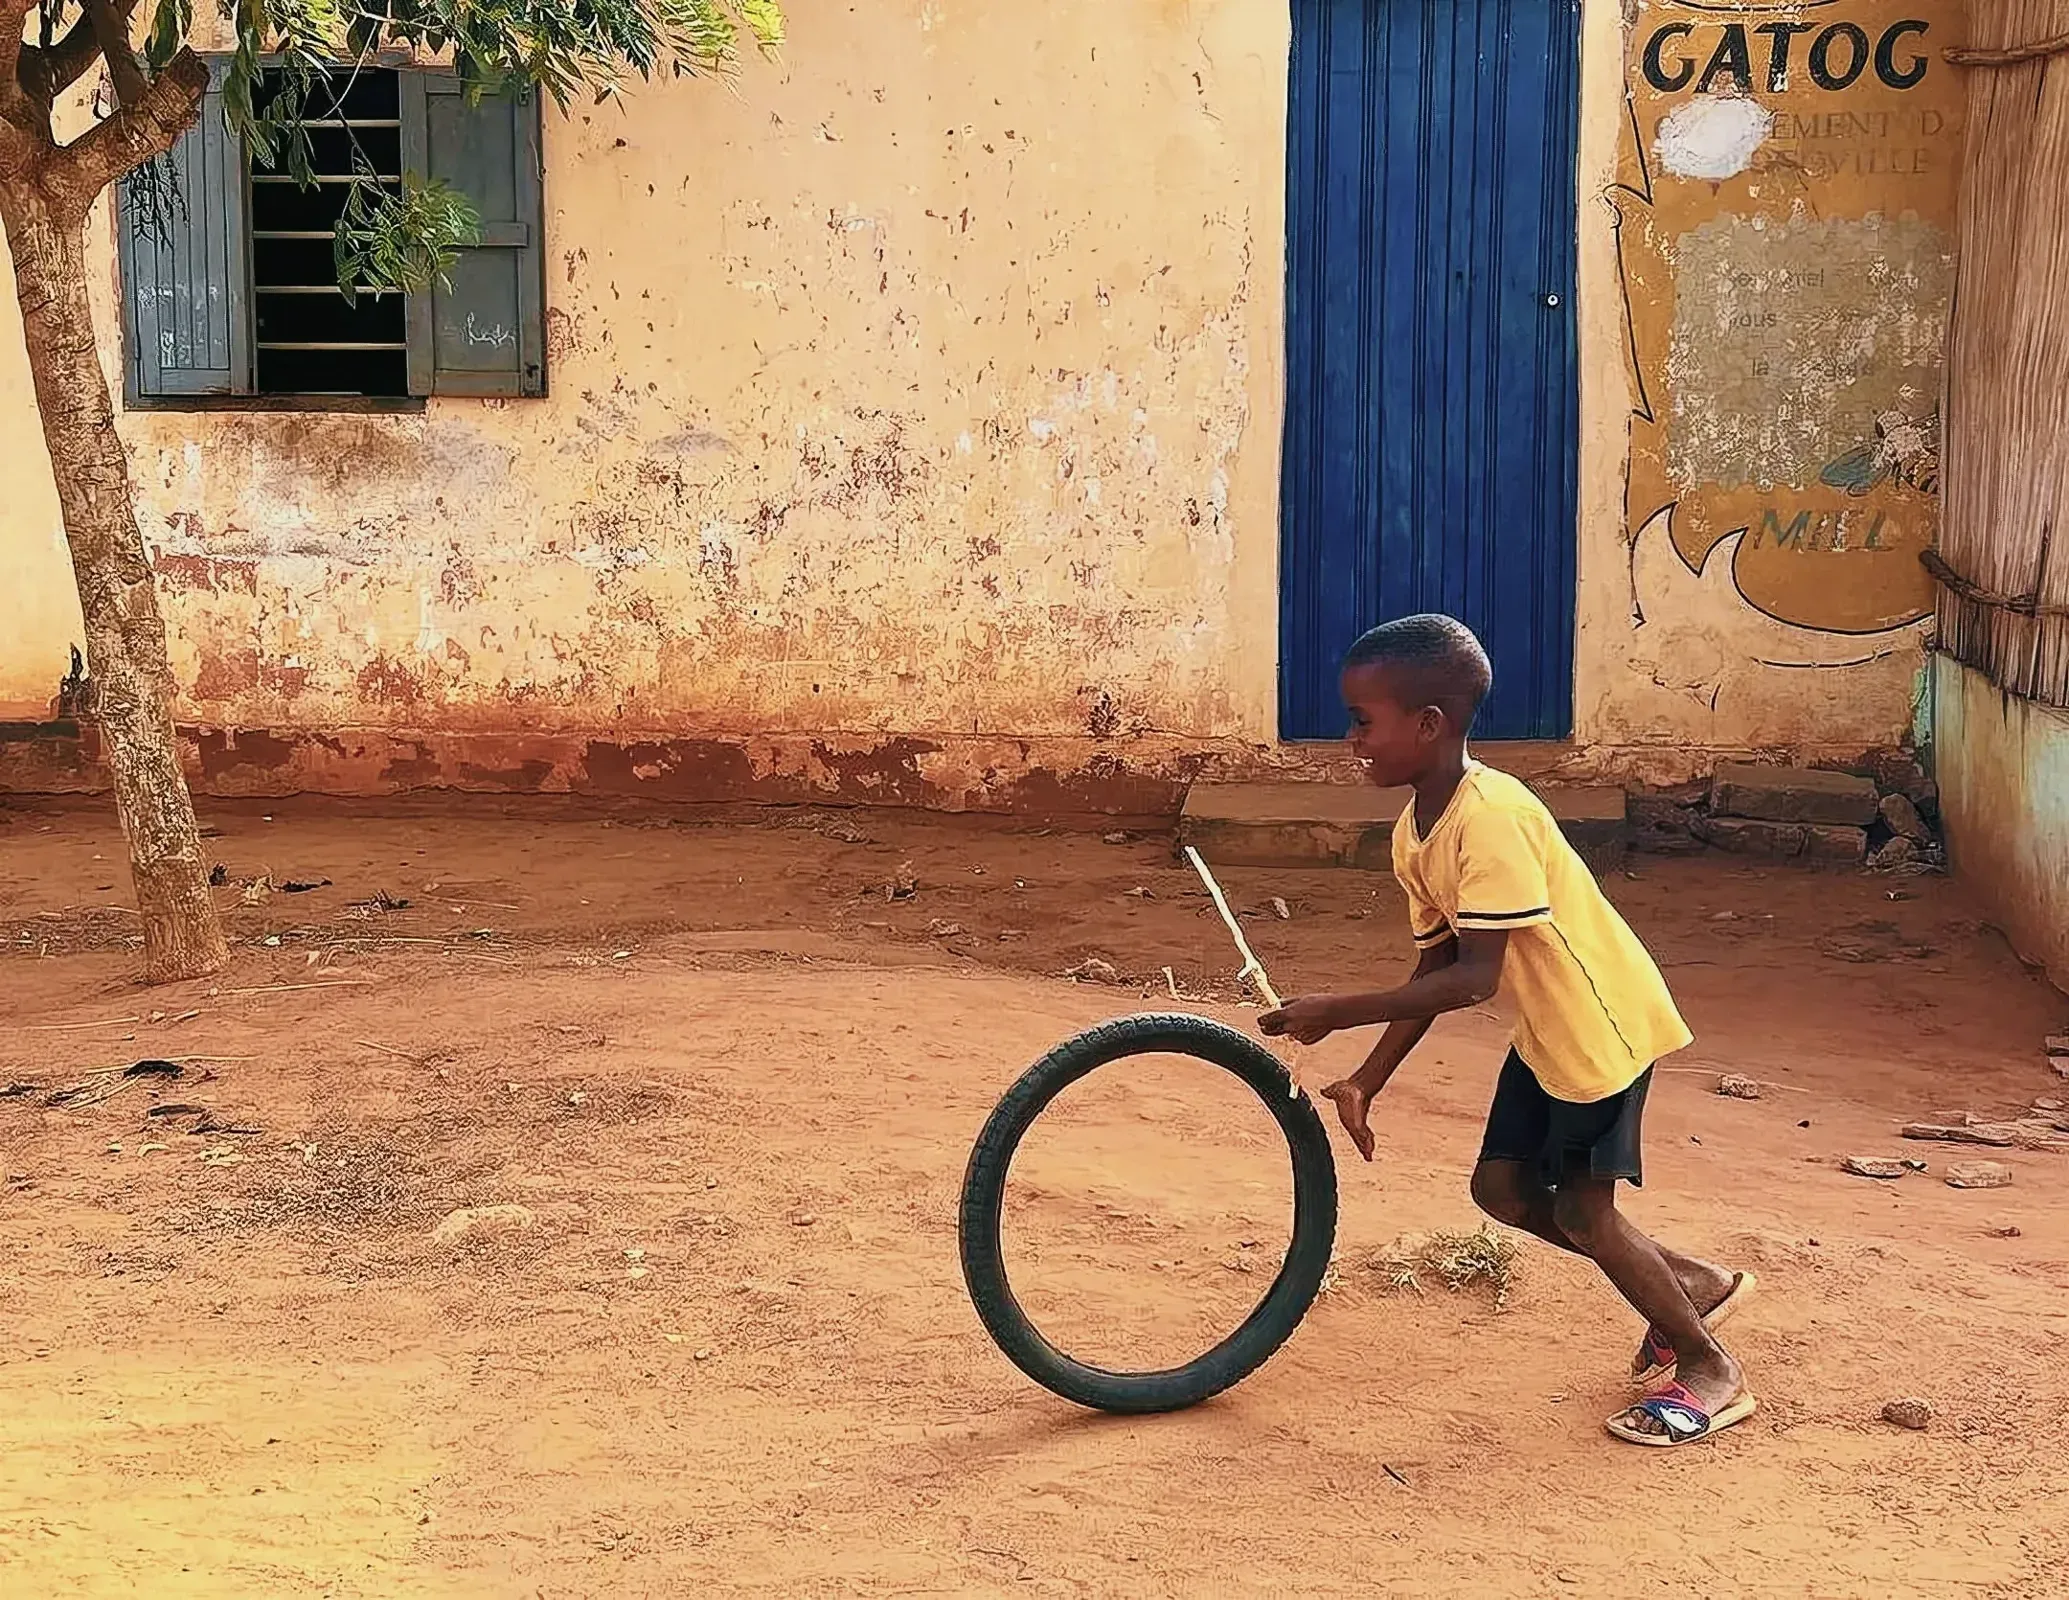 A young boy pushing a tire in Togoville, Togo